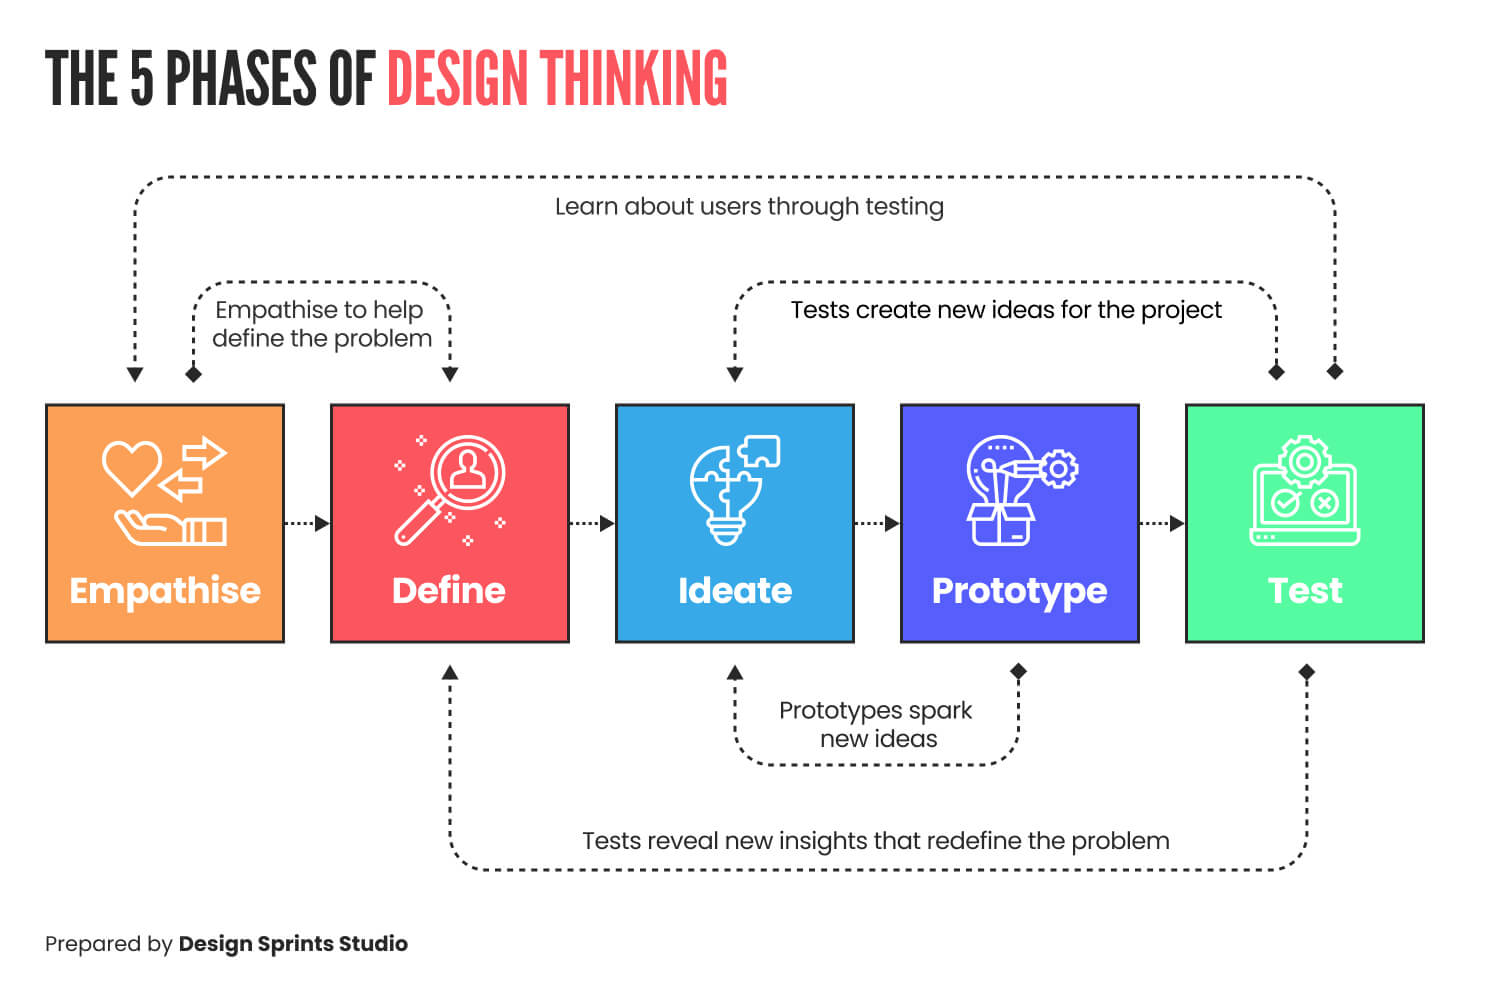 The 5 phases of Design Thinking